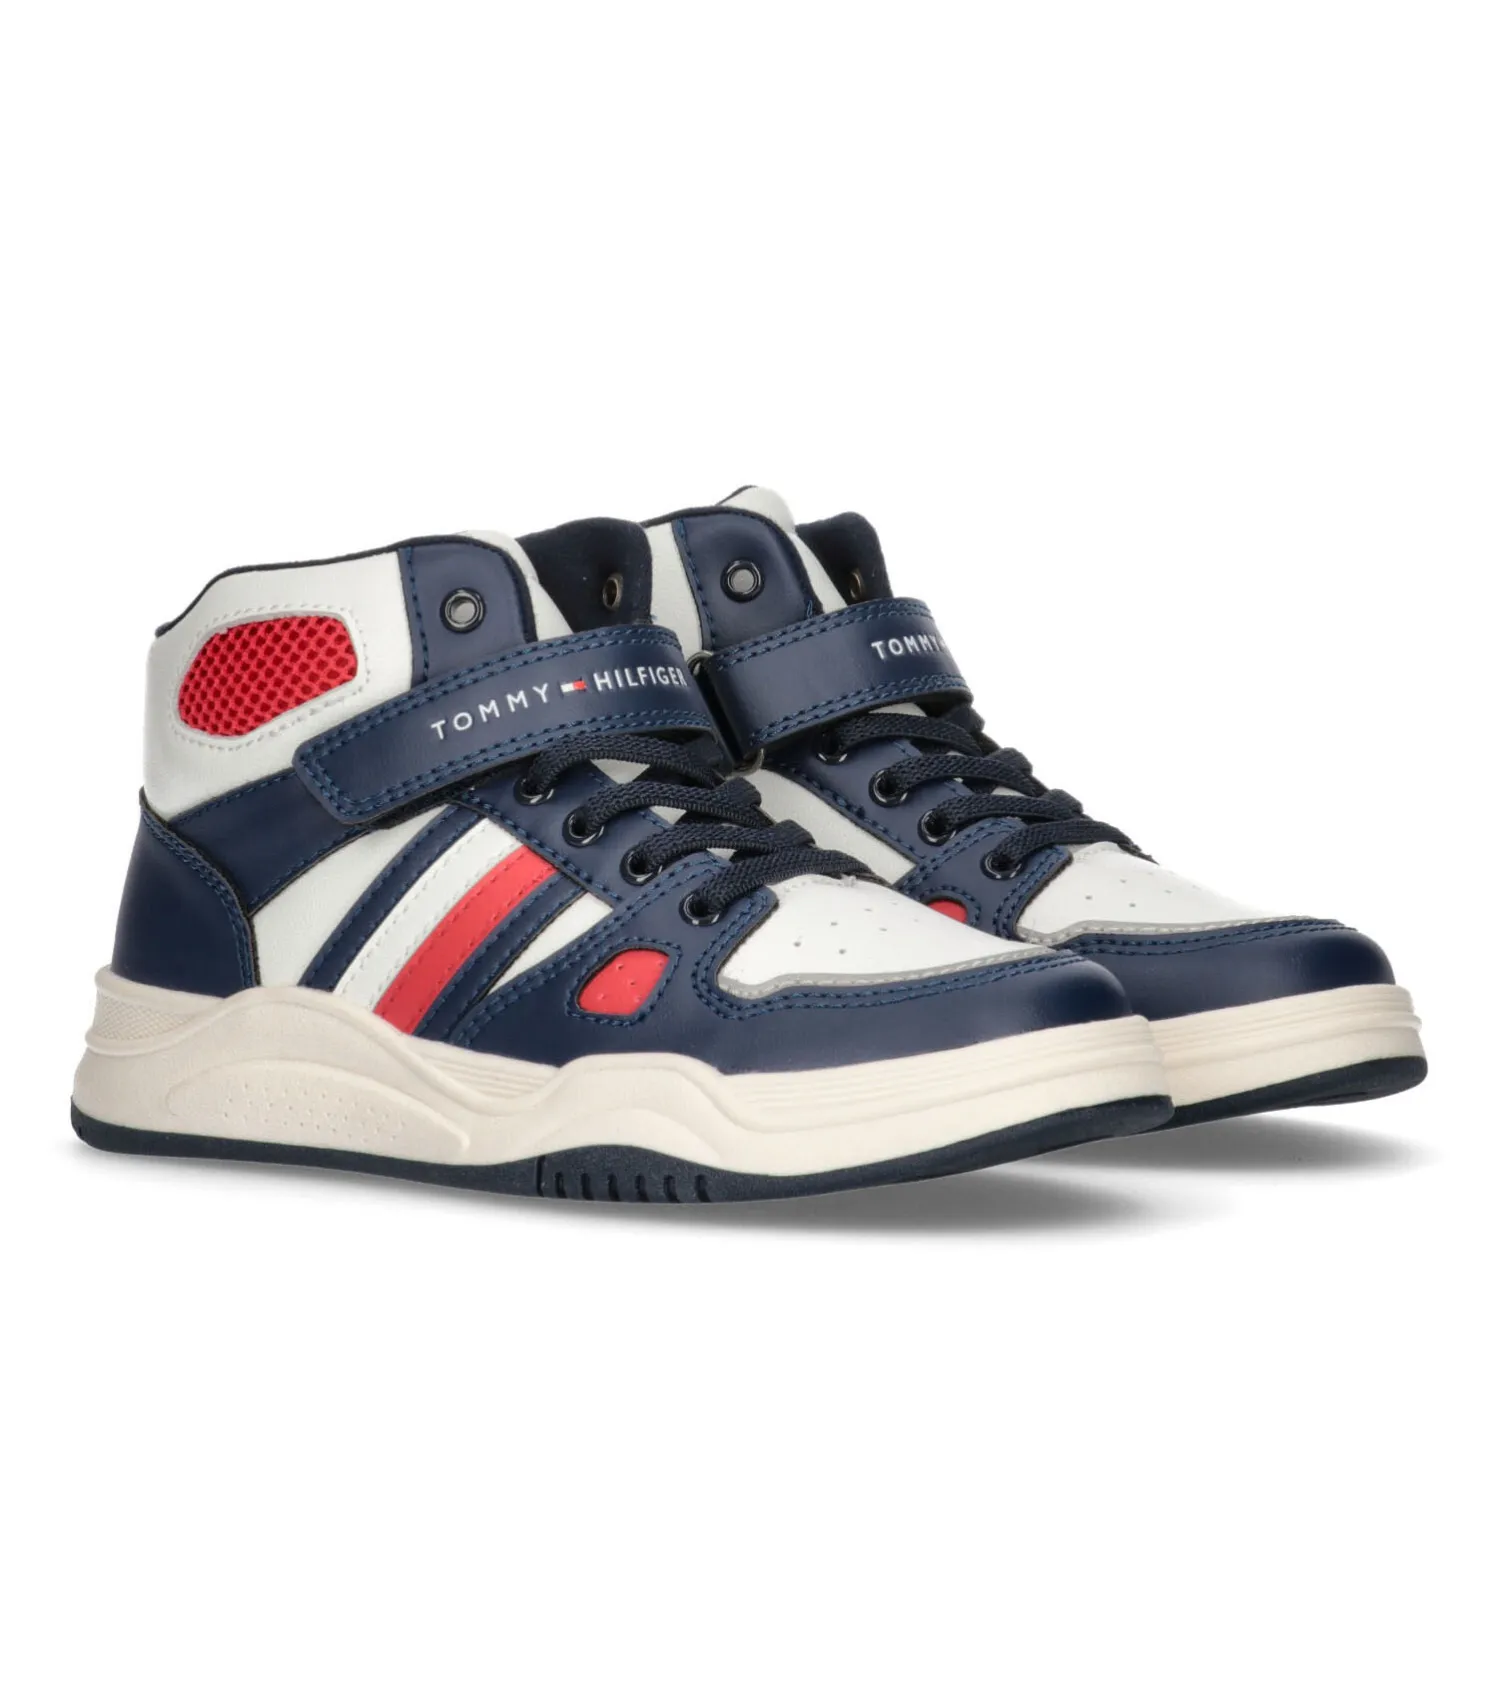 TOMMY HILFIGER Boys Stripes High White/Red - Blue/Off | Top Lace Choice+Attitude up/Velcro Sneakers